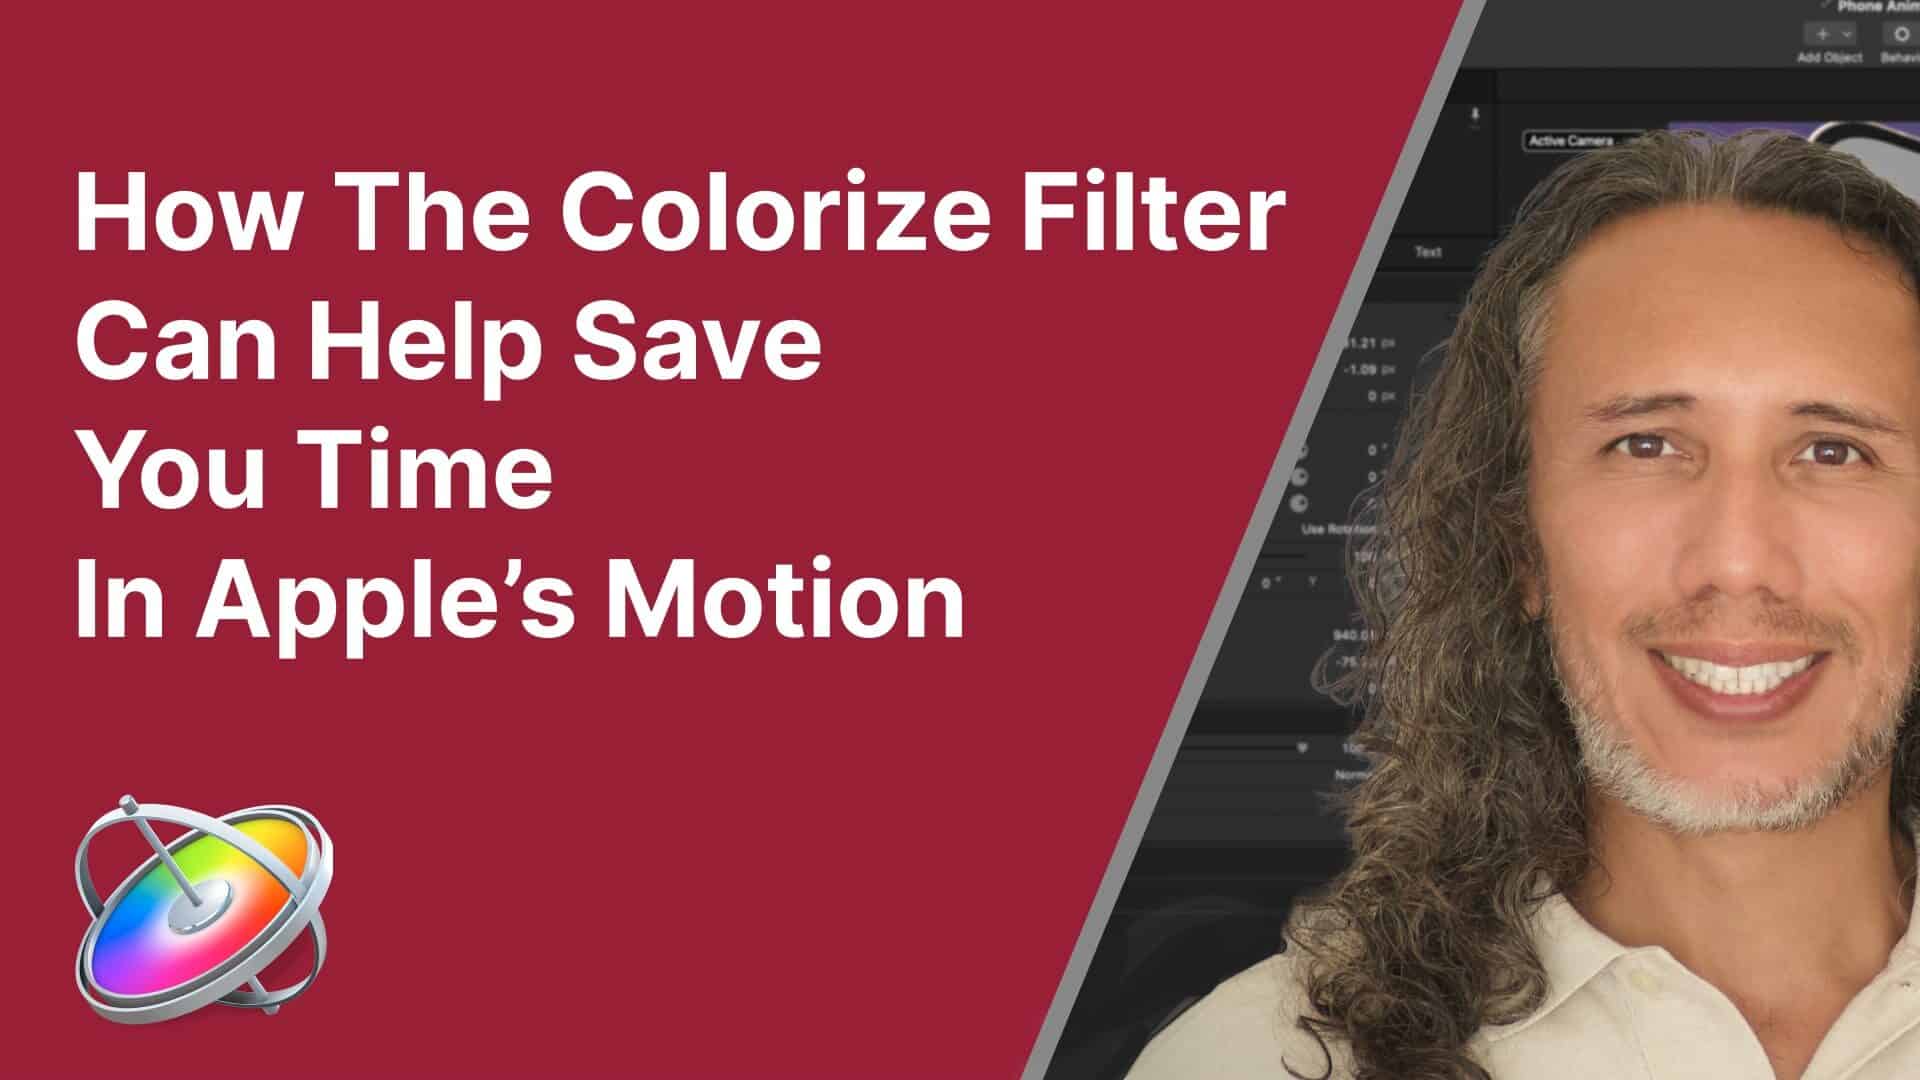 How The Colorize Filter Can Help Save You Time In Apple’s Motion